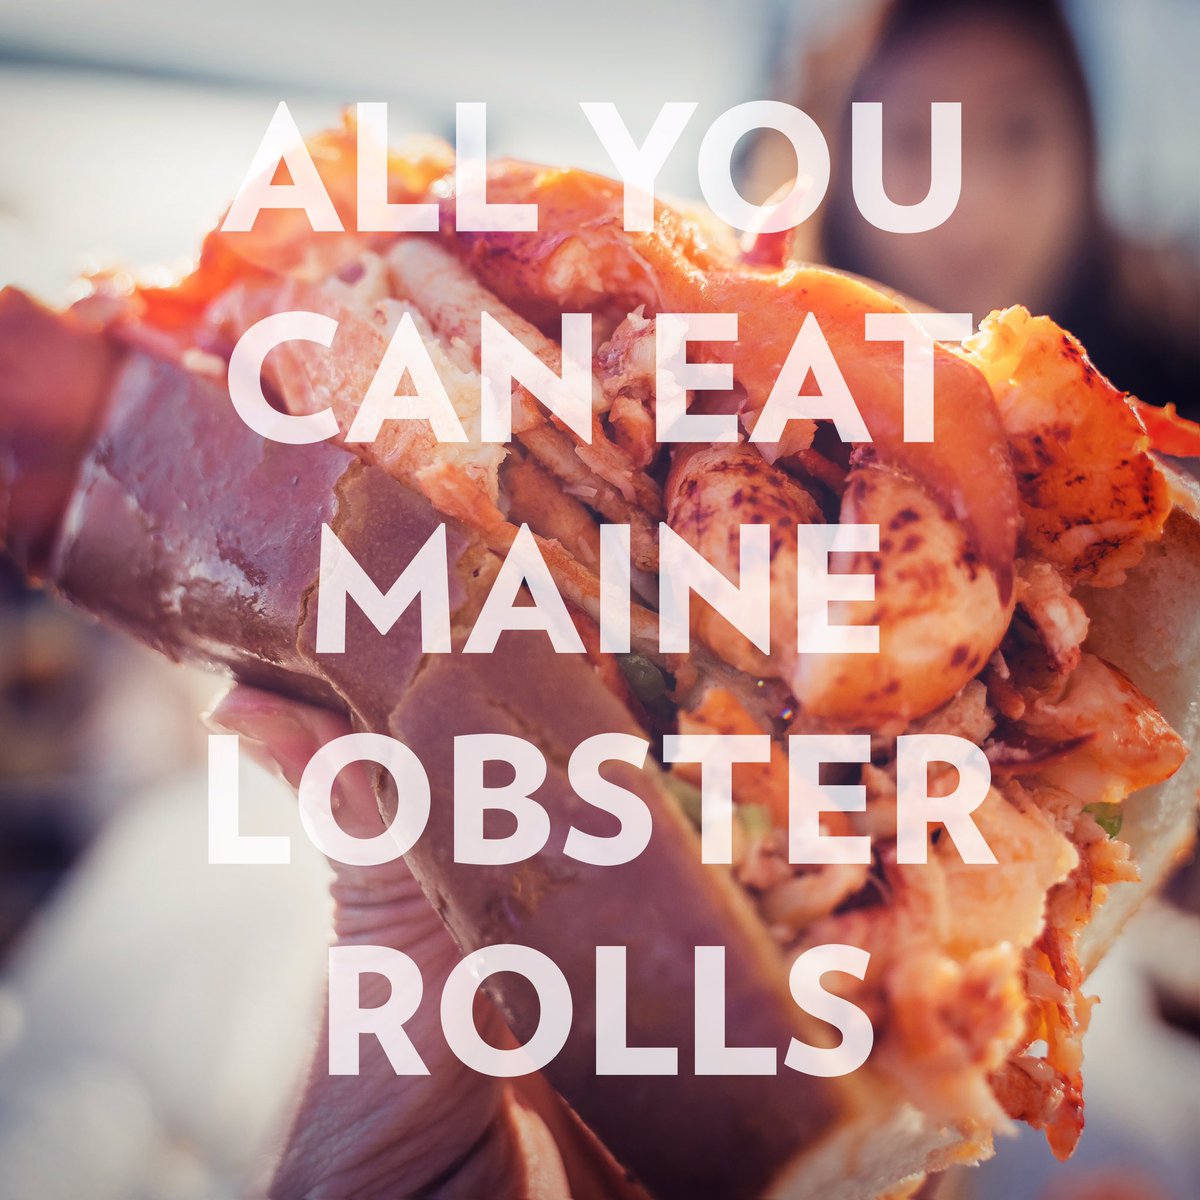 It's on!
catch35.com #lobsterbash #lobsterroll #allyoucaneat #mainelobster #chicagofood #goodeatschicago #chitownfood #naperville #downtown_naperville